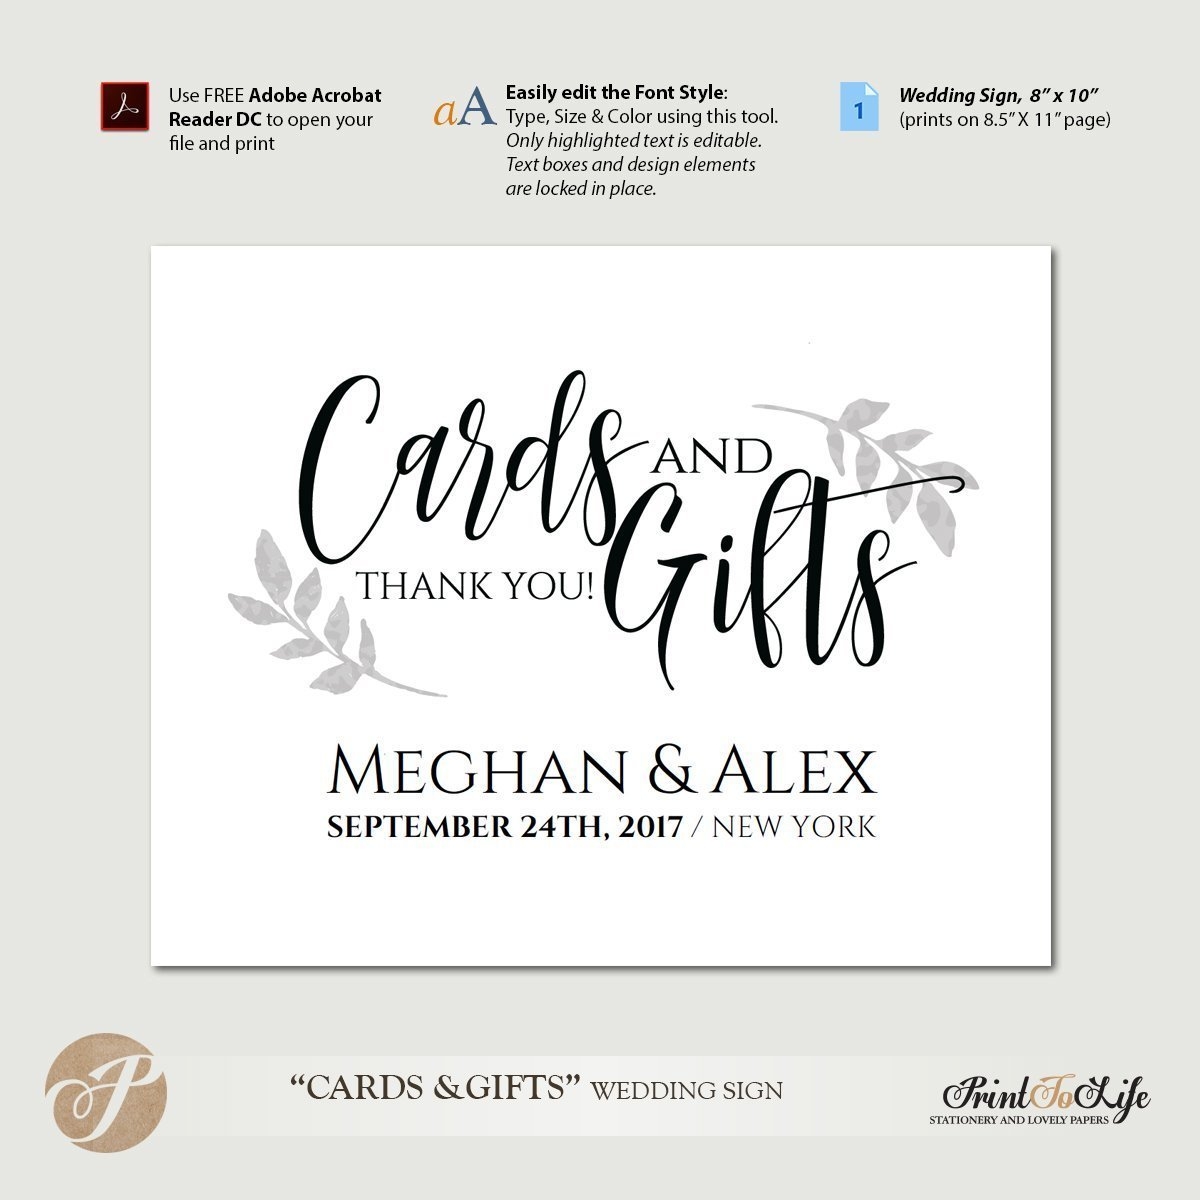 Cards And Gifts Sign Wedding Cards Sign Gifts And Cards Sign Printable Template Printolife